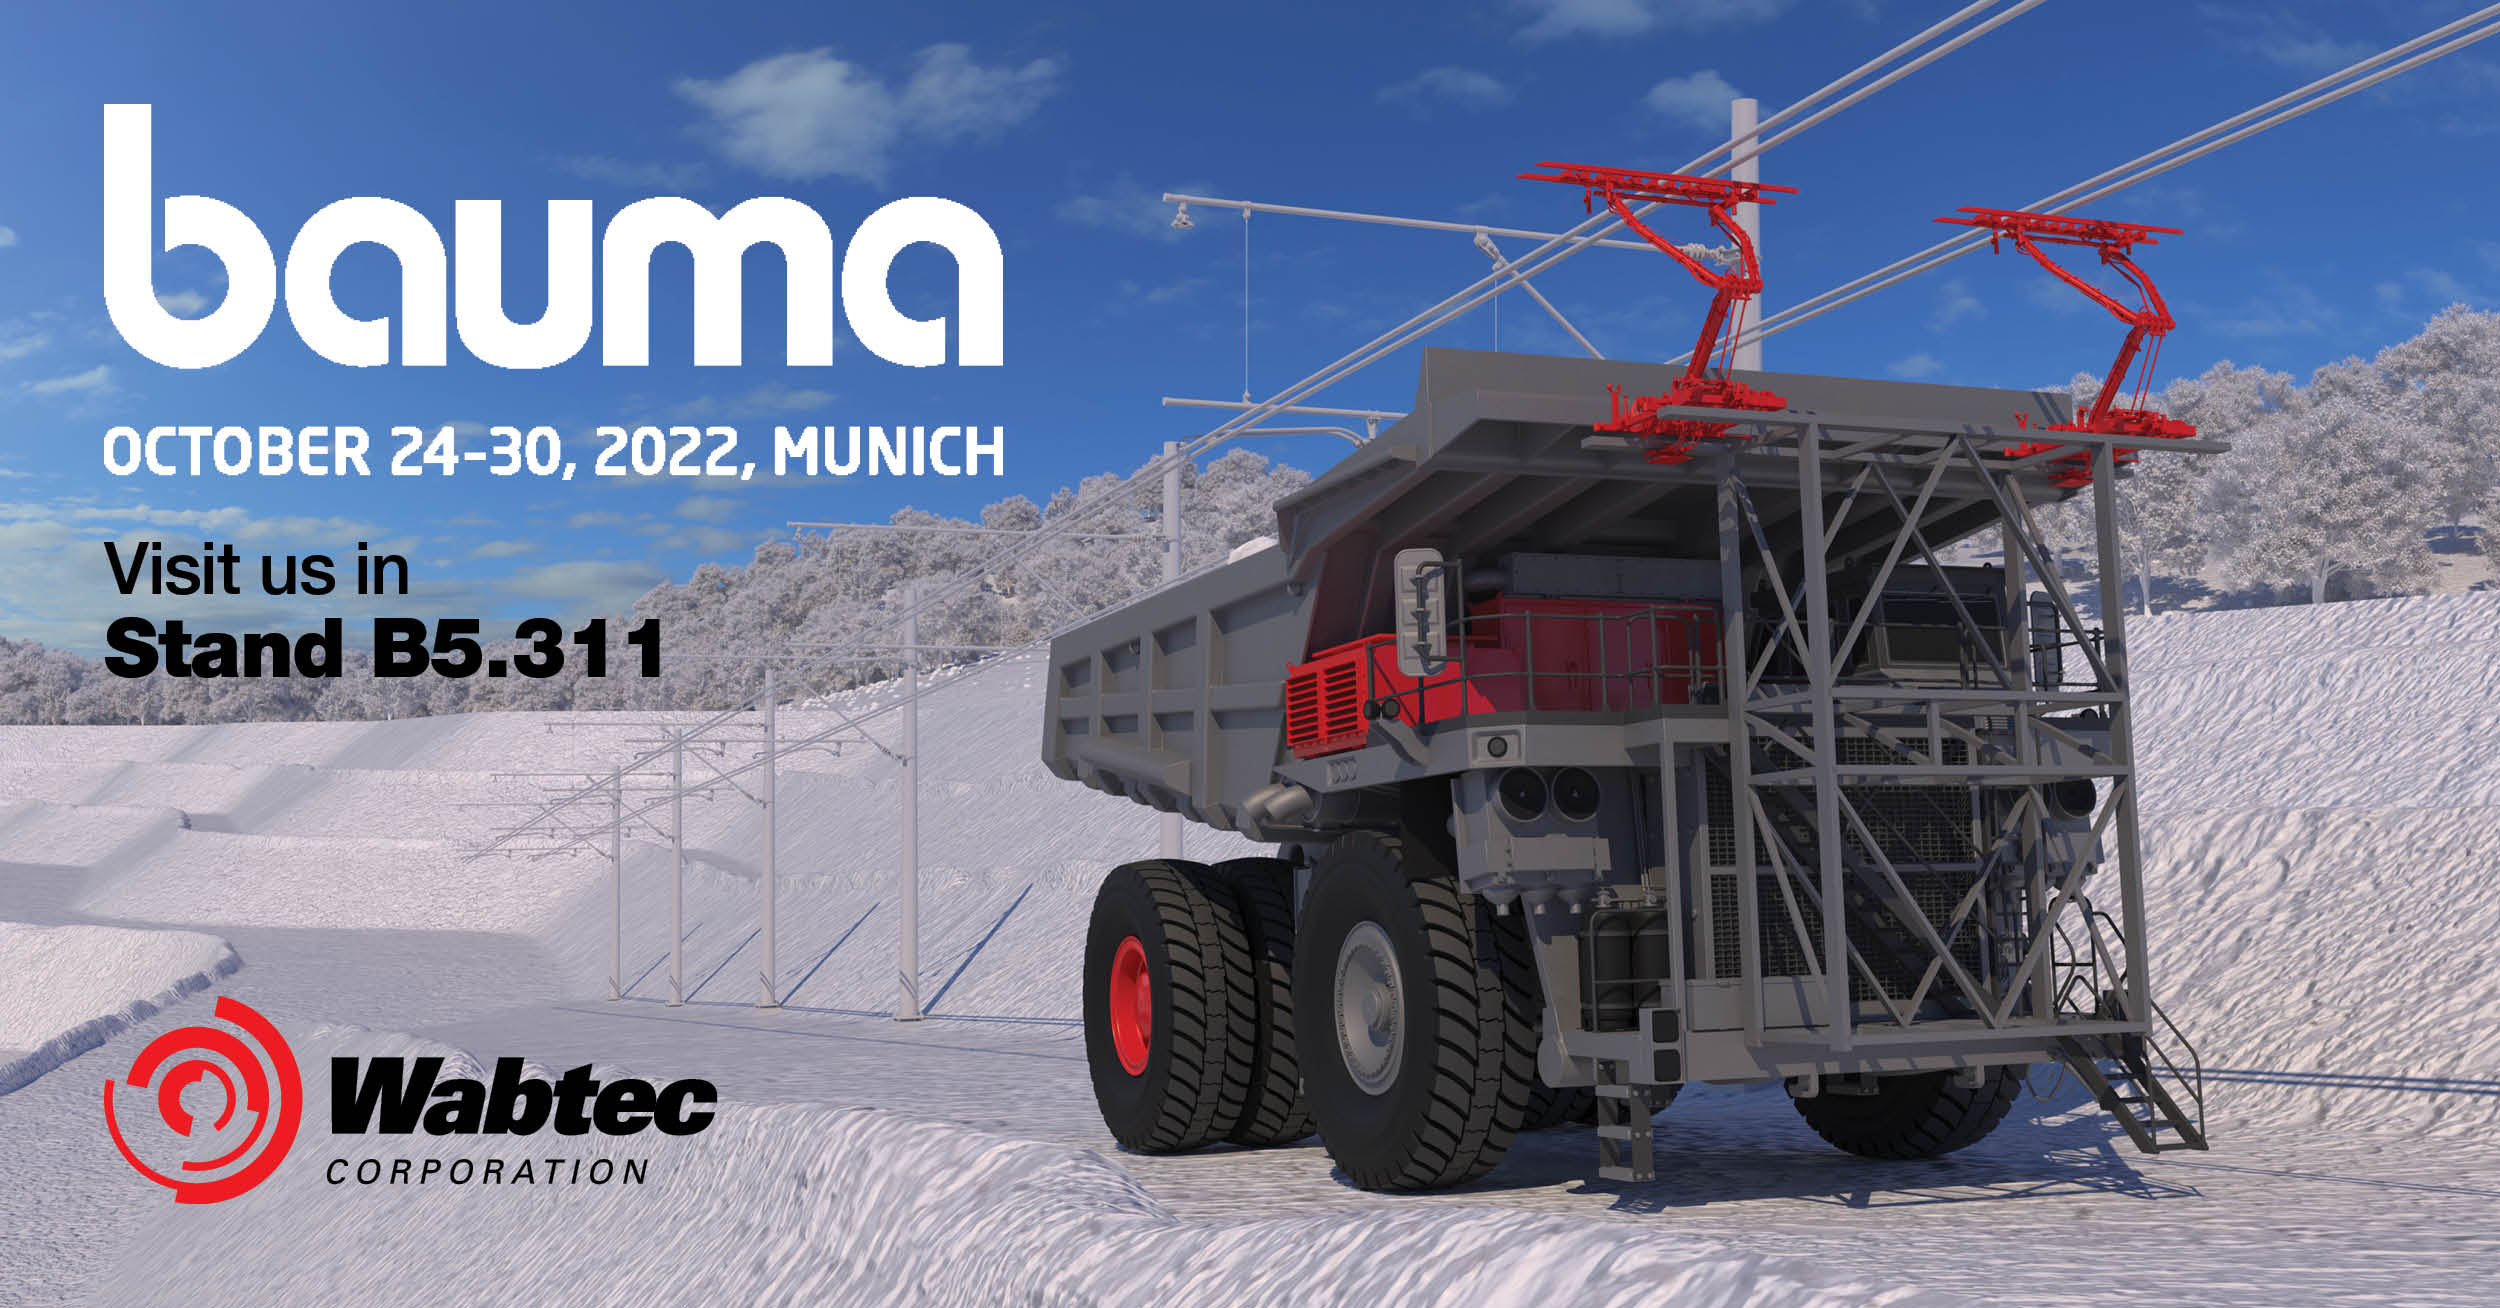 Wabtec to Highlight Electrification and Sustainable Mining Operations at Bauma 2022